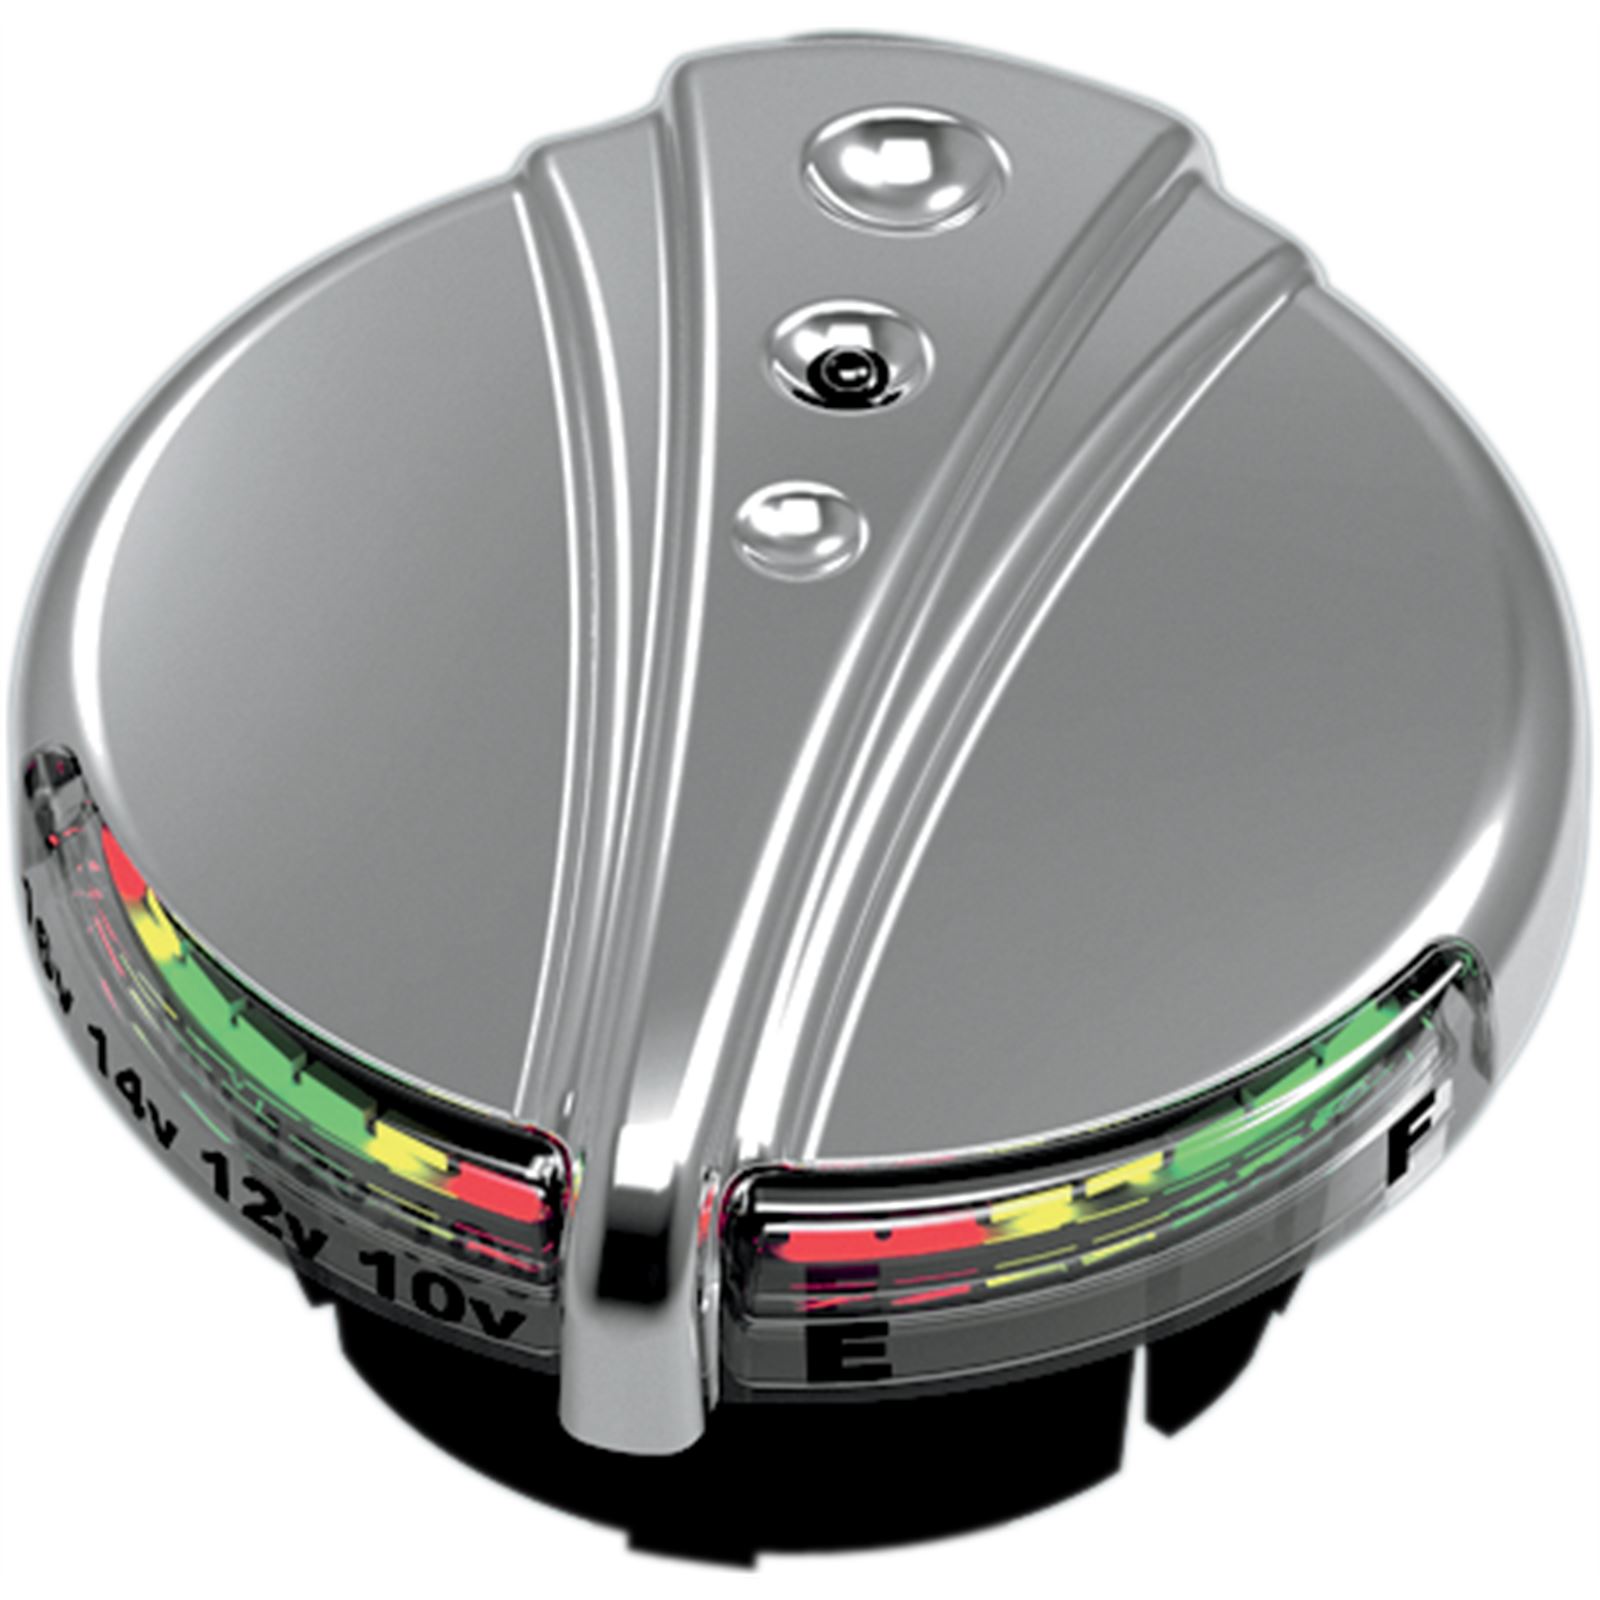 Kuryakyn Gas Cap with LED Fuel and Battery Gauge